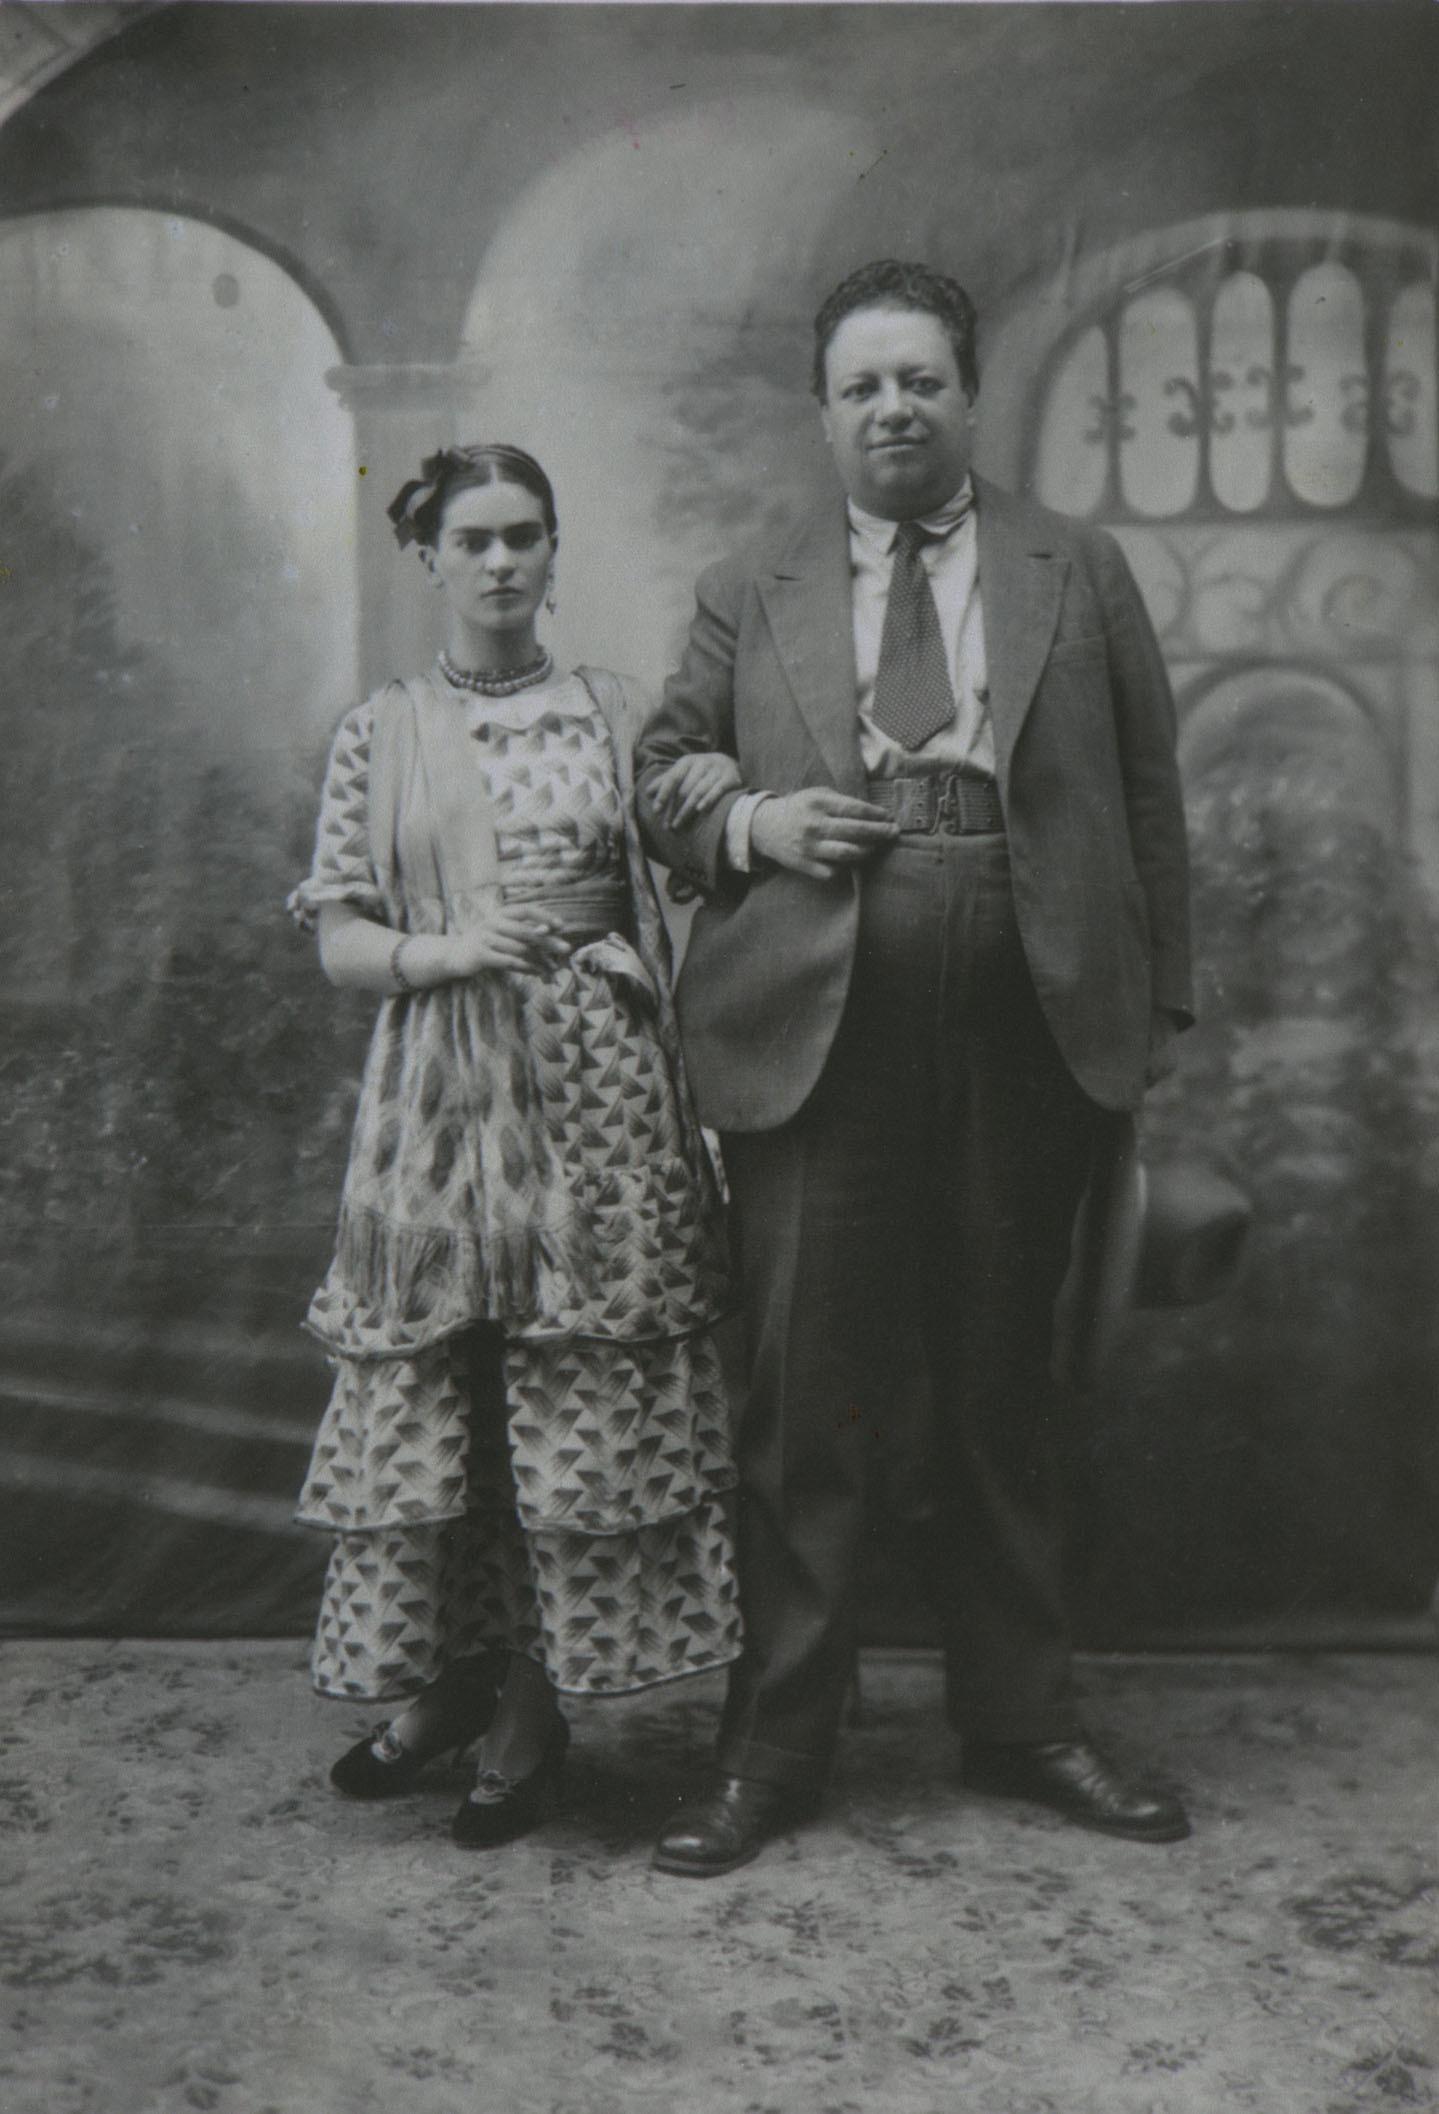 Wedding portrait of Frida Kahlo and Diego Rivera, August 21, 1929. Kahlo is holding a cigarette.